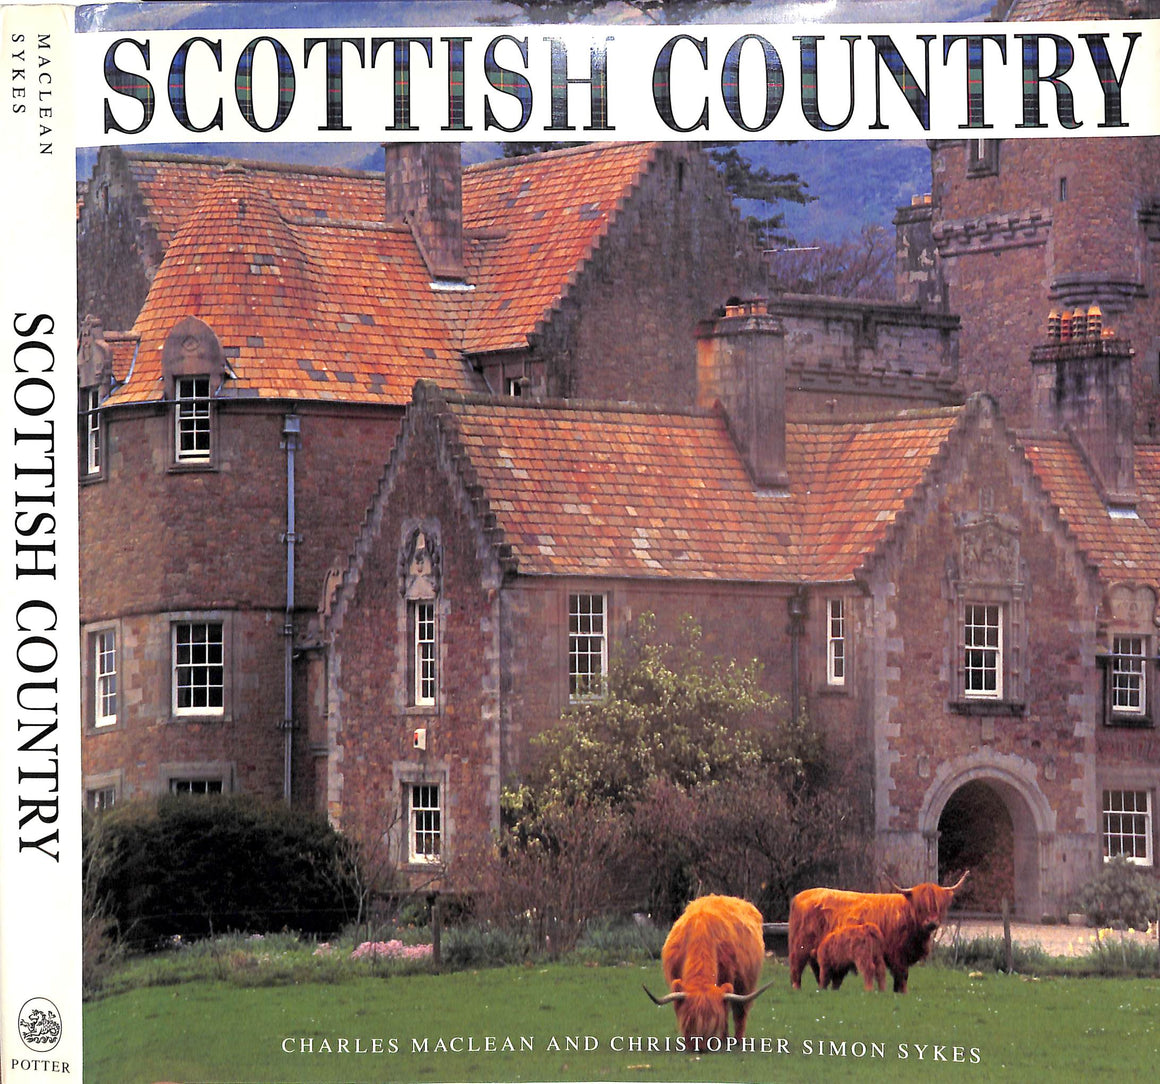 "Scottish Country" 1992 MACLEAN, Charles and SYKES, Christopher Simon